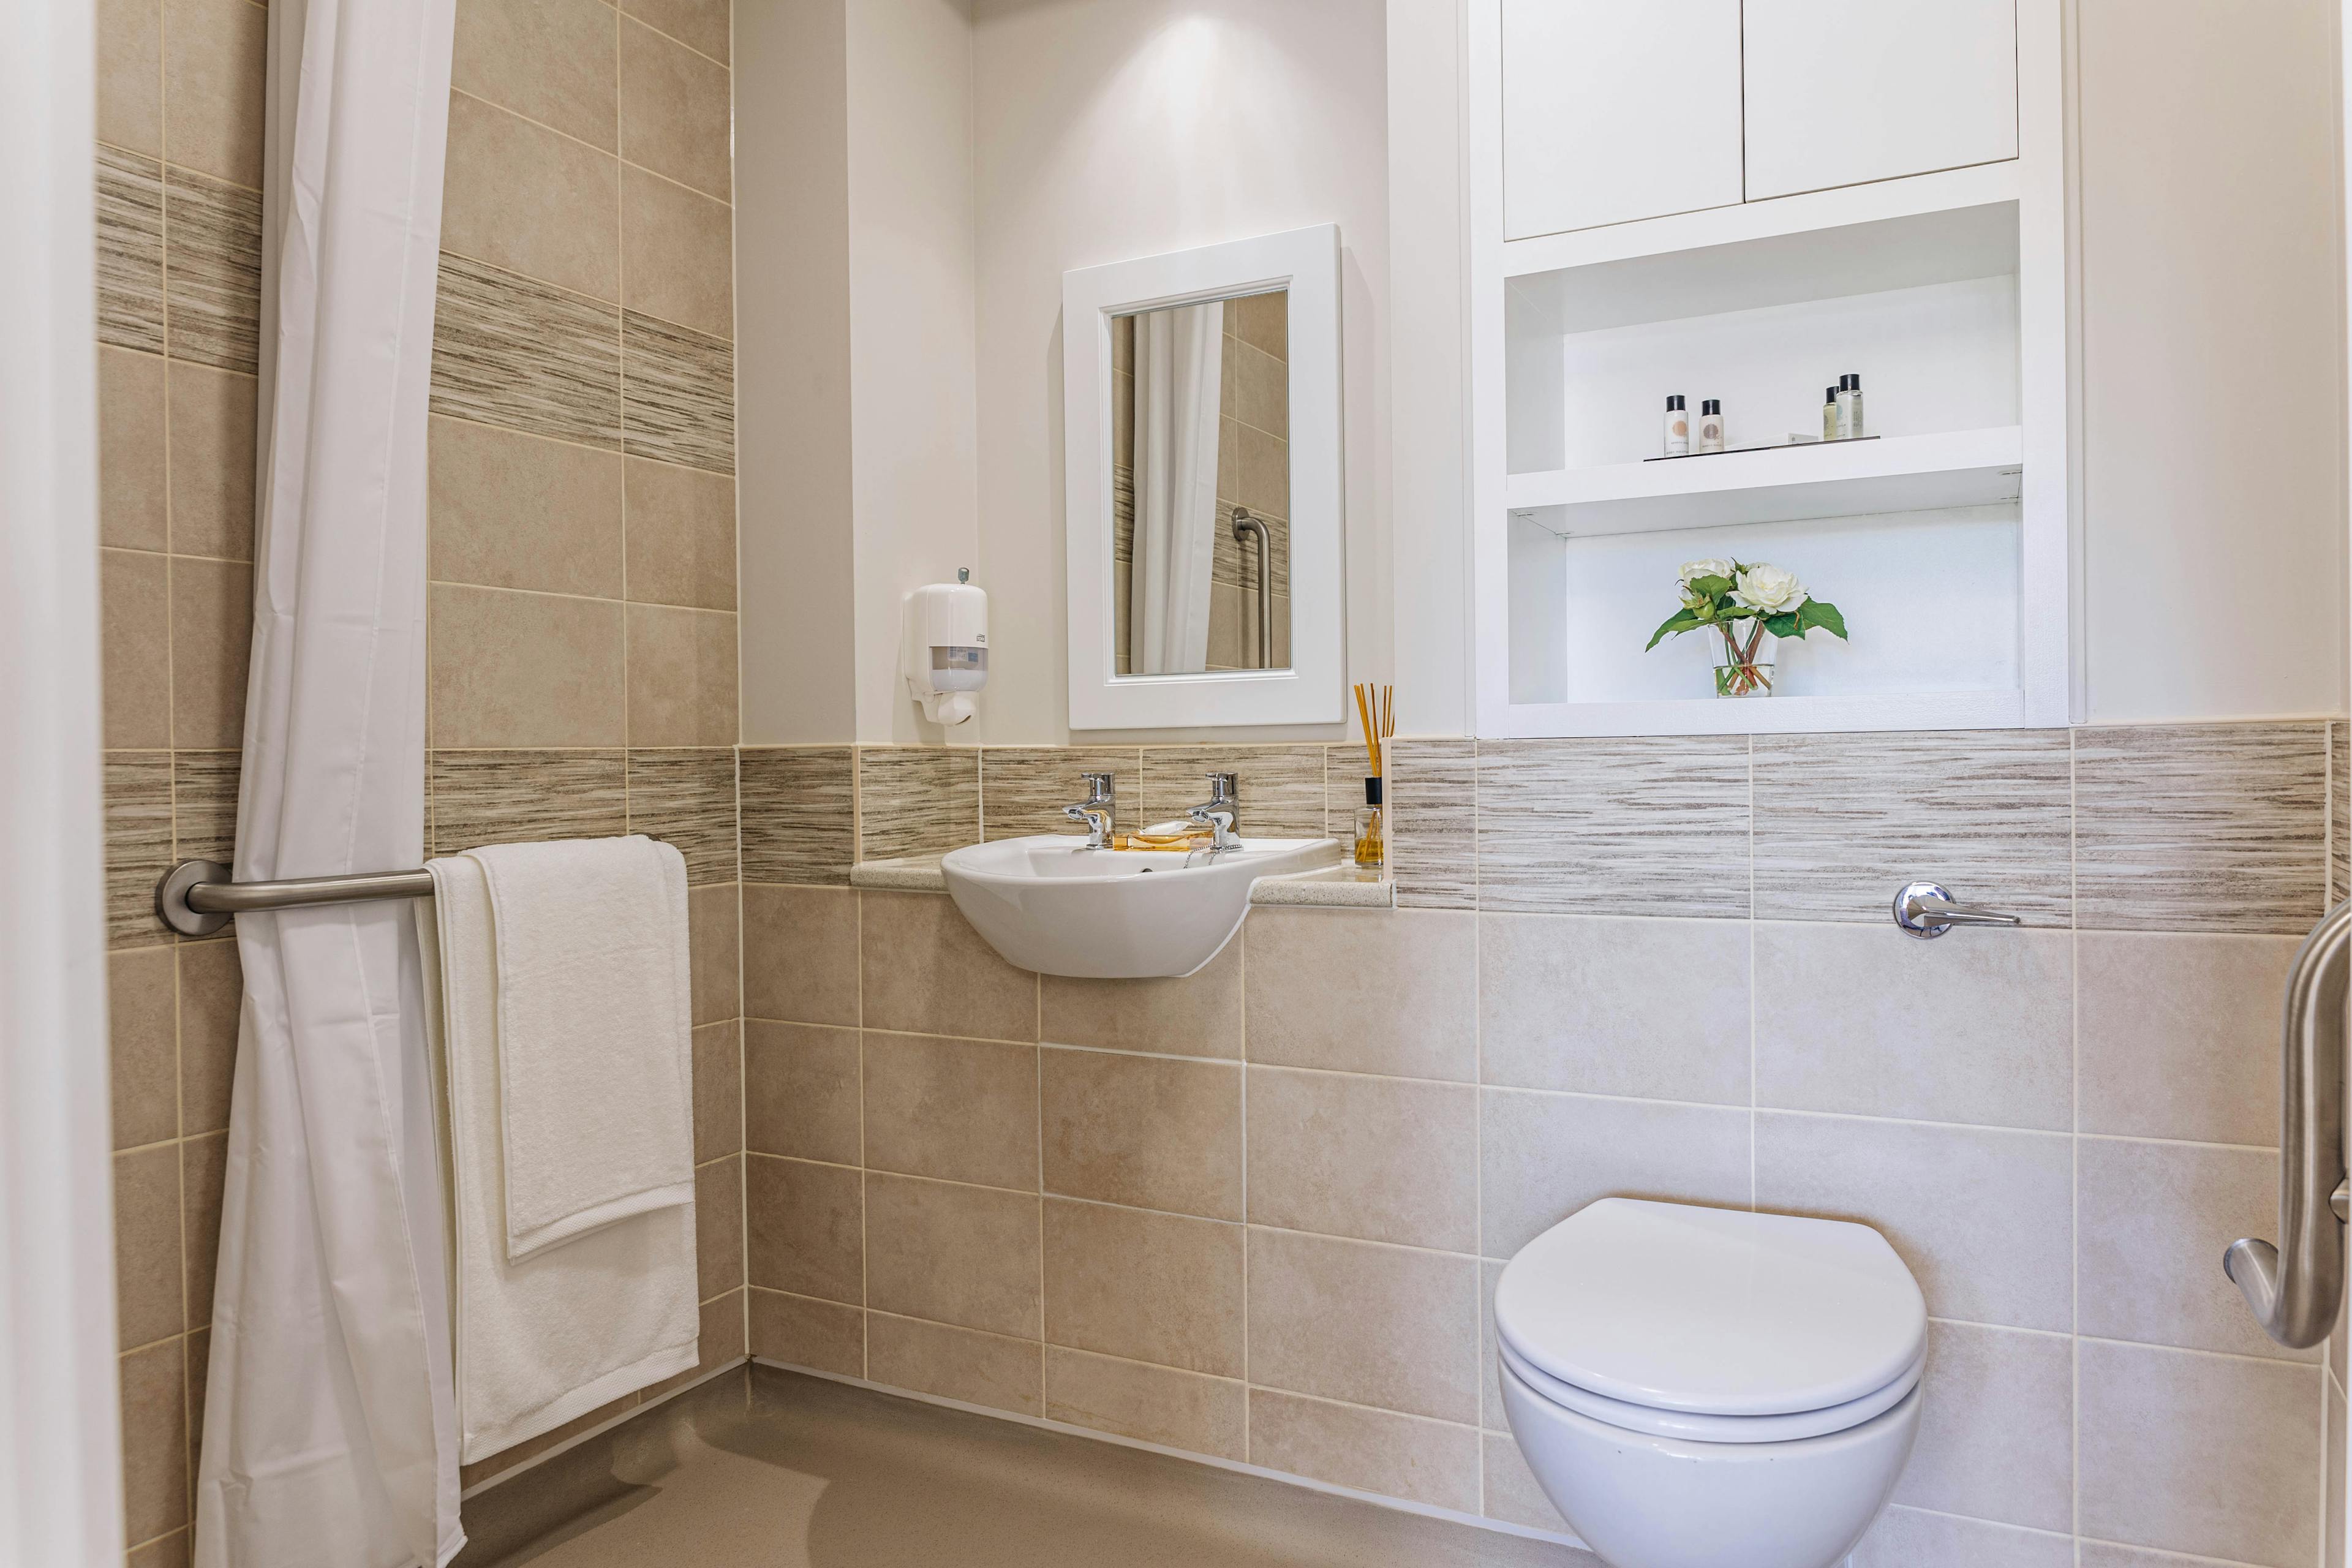 Bathroom at Parley Place Care Home in Ferndown, Dorset